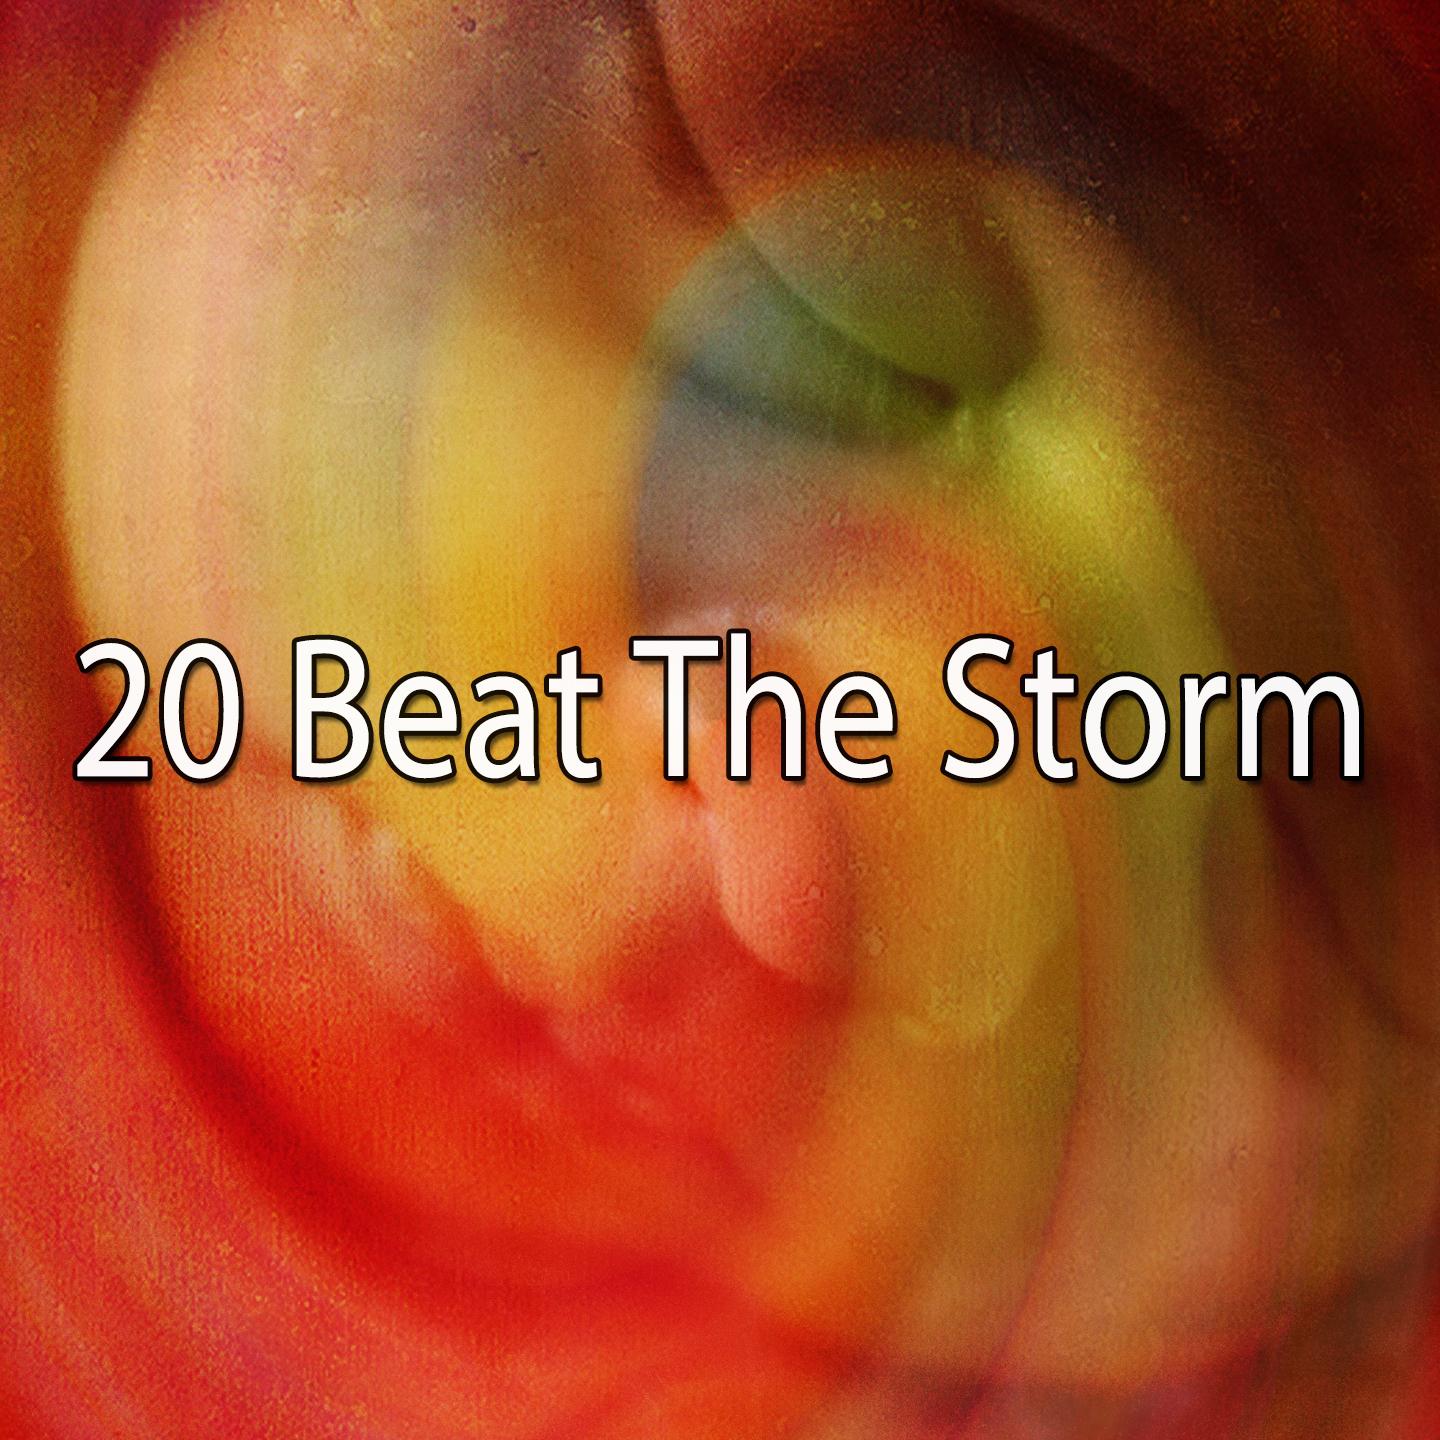 20 Beat the Storm